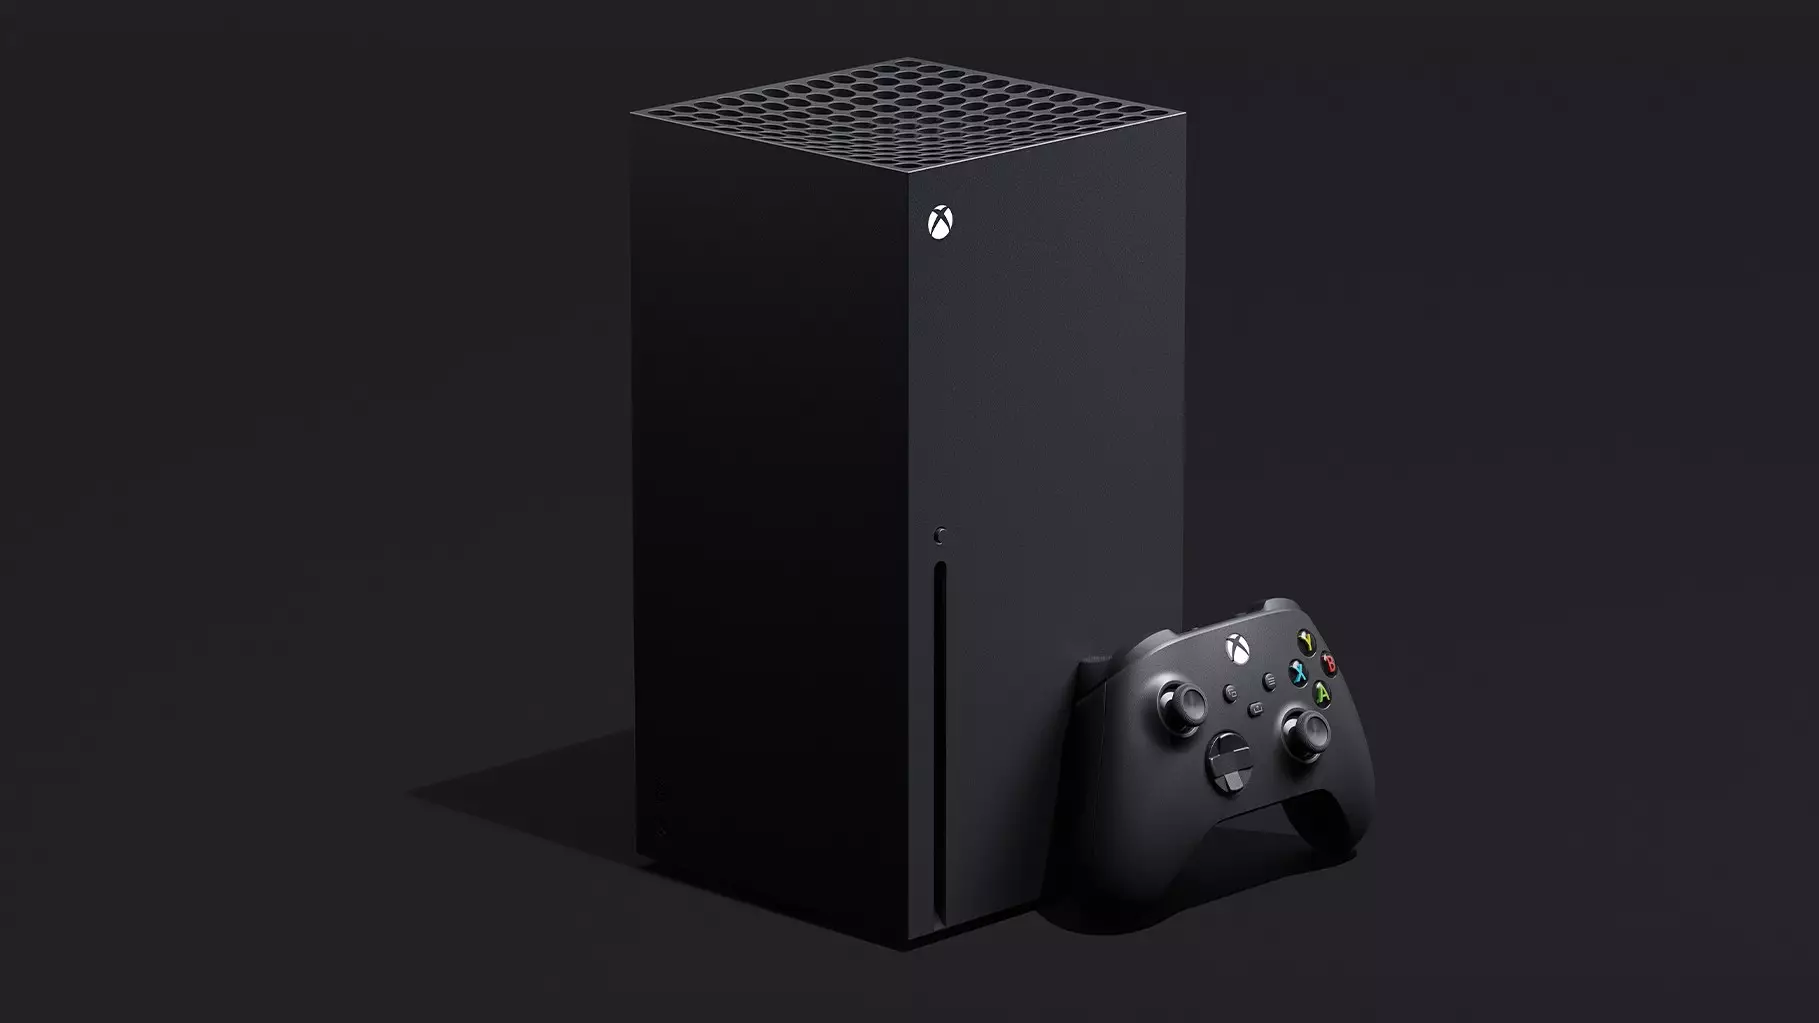 Microsoft Kindly Asks Users Not To Vape Into Their Brand New Xbox Series X